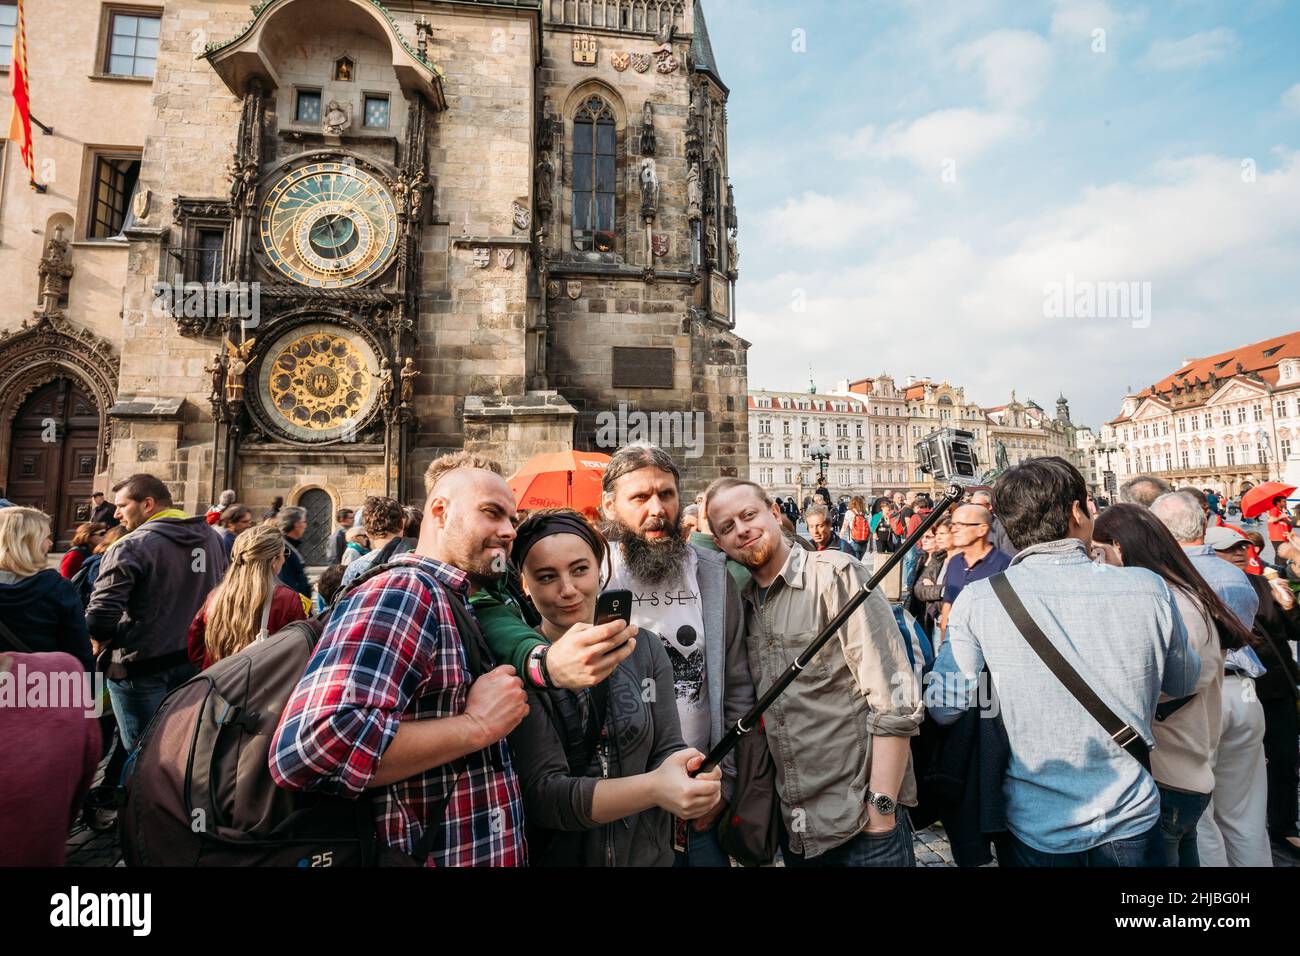 Group of tourists taking pictures against background of sights - town hall with astronomical clock - orloj in Prague, Czech Republic Stock Photo